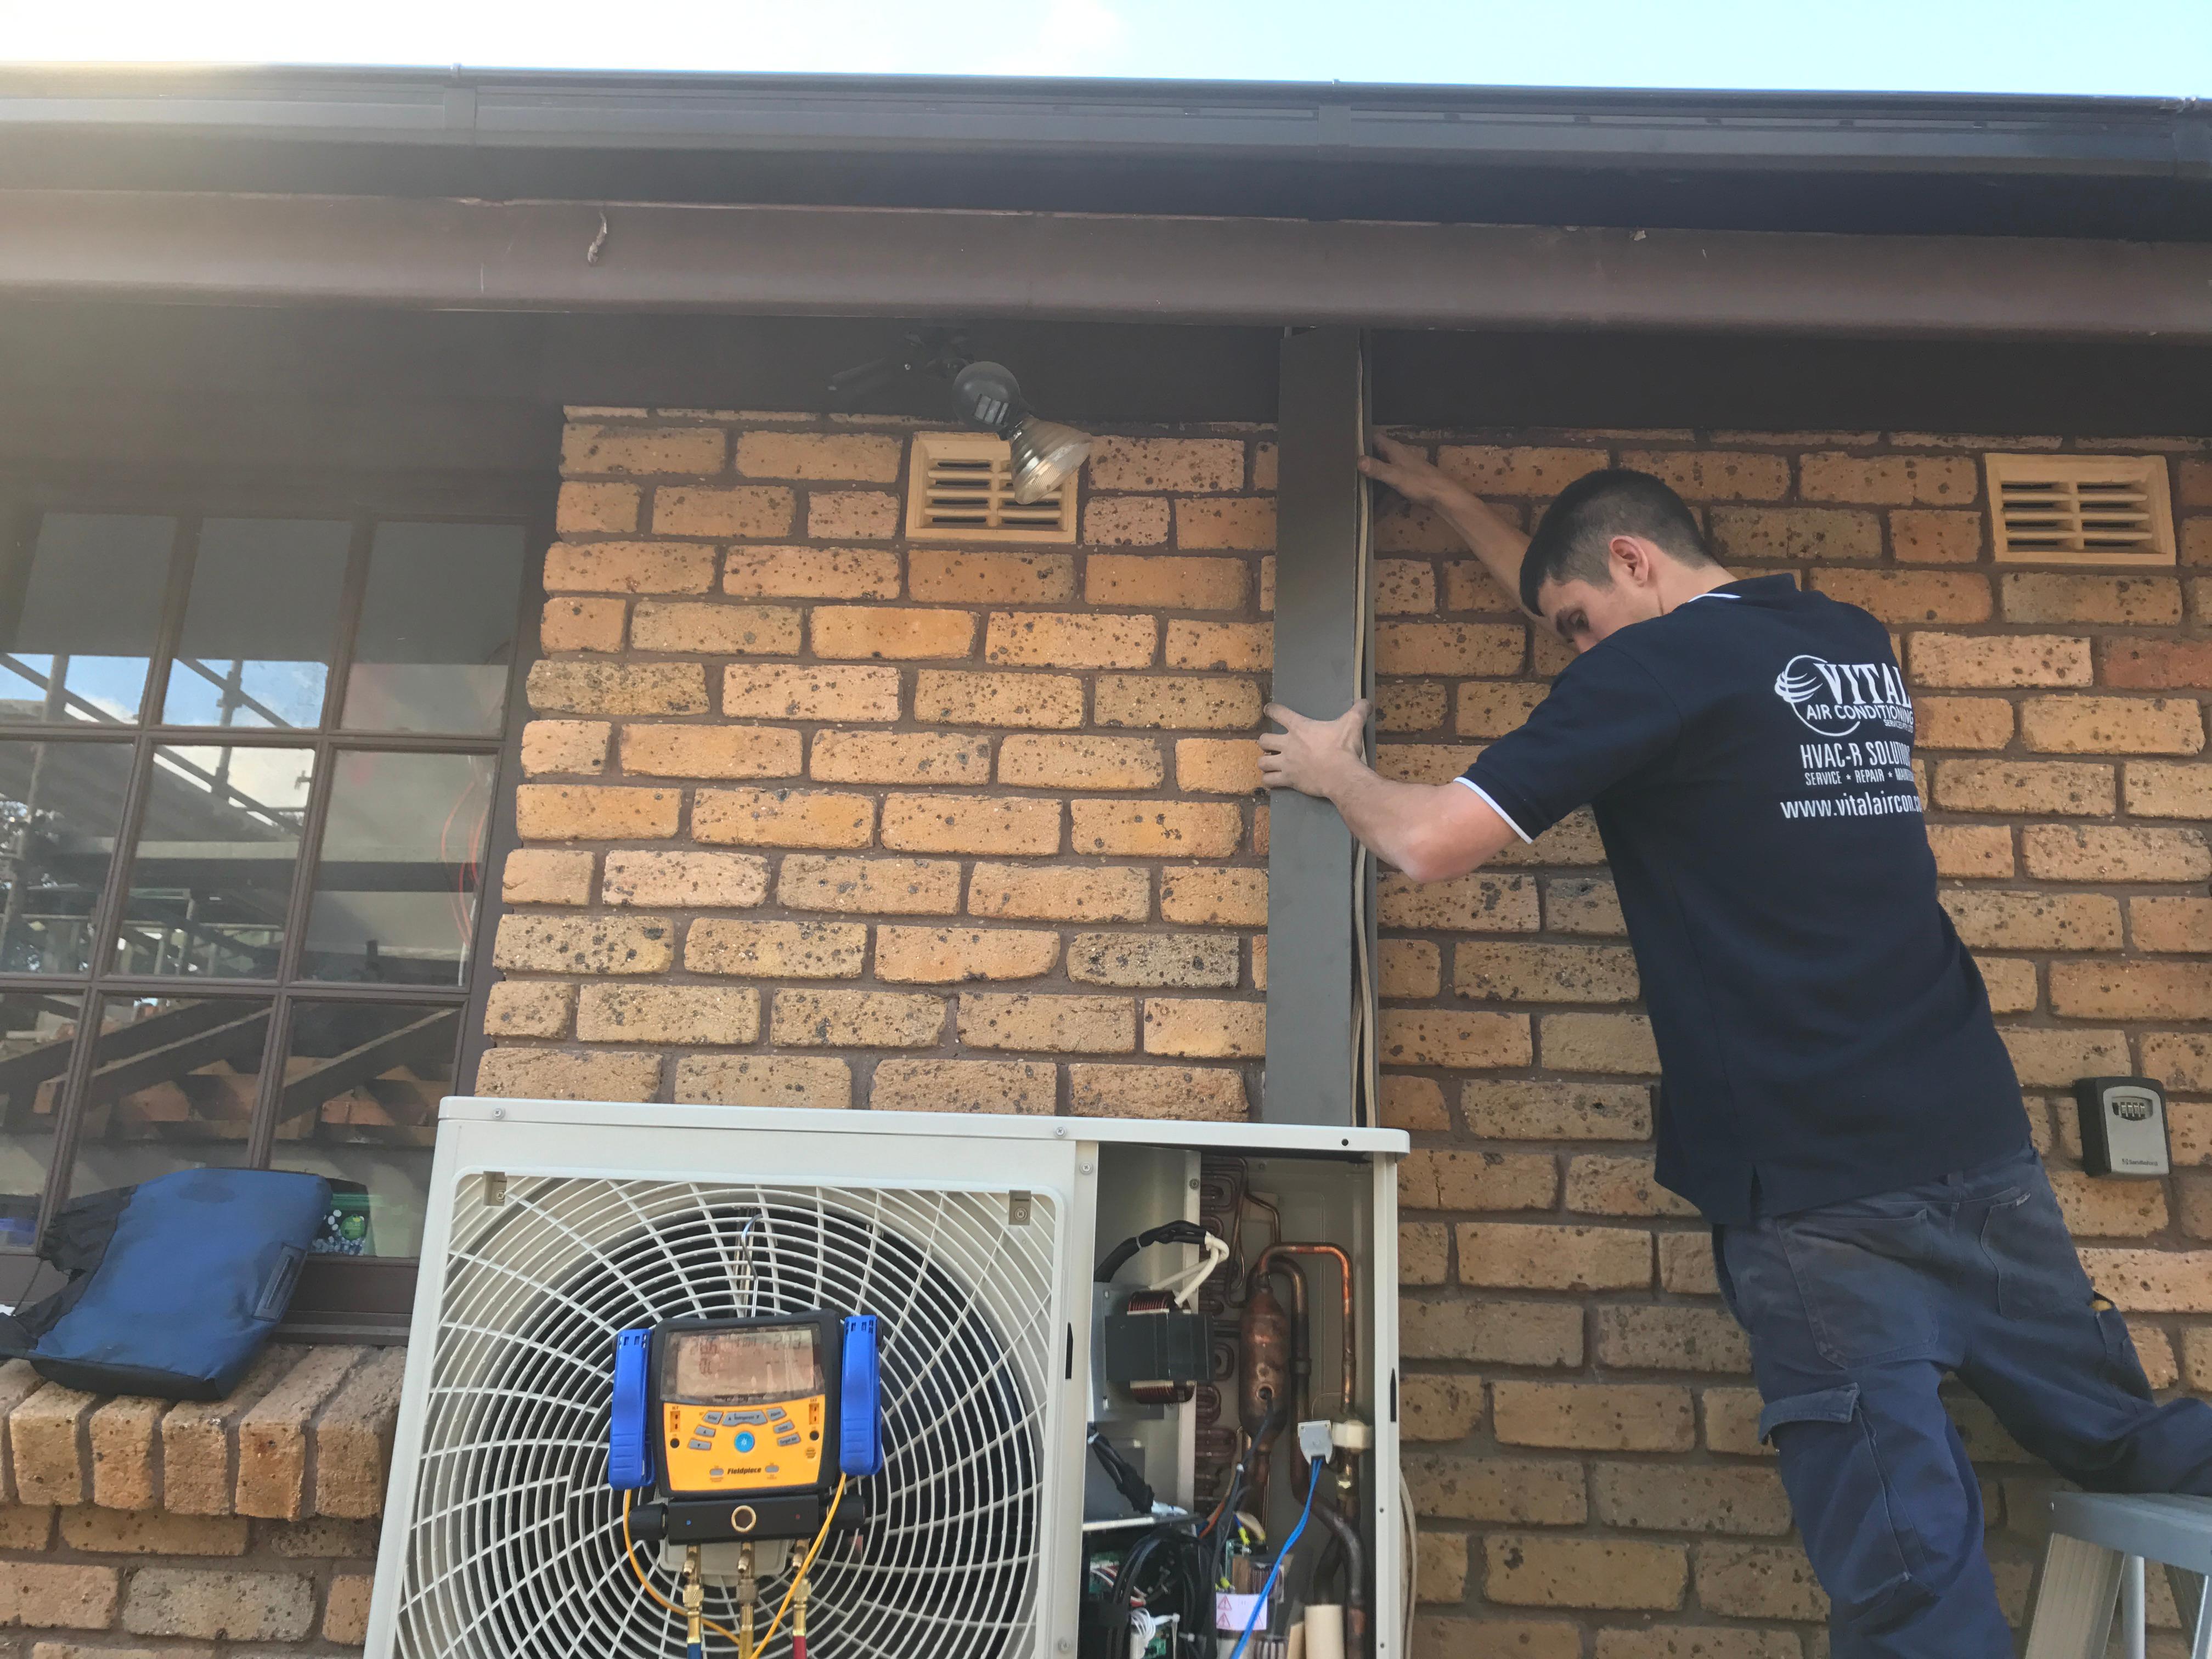 Images VITAL AIRCONDITIONING SERVICES PTY LTD